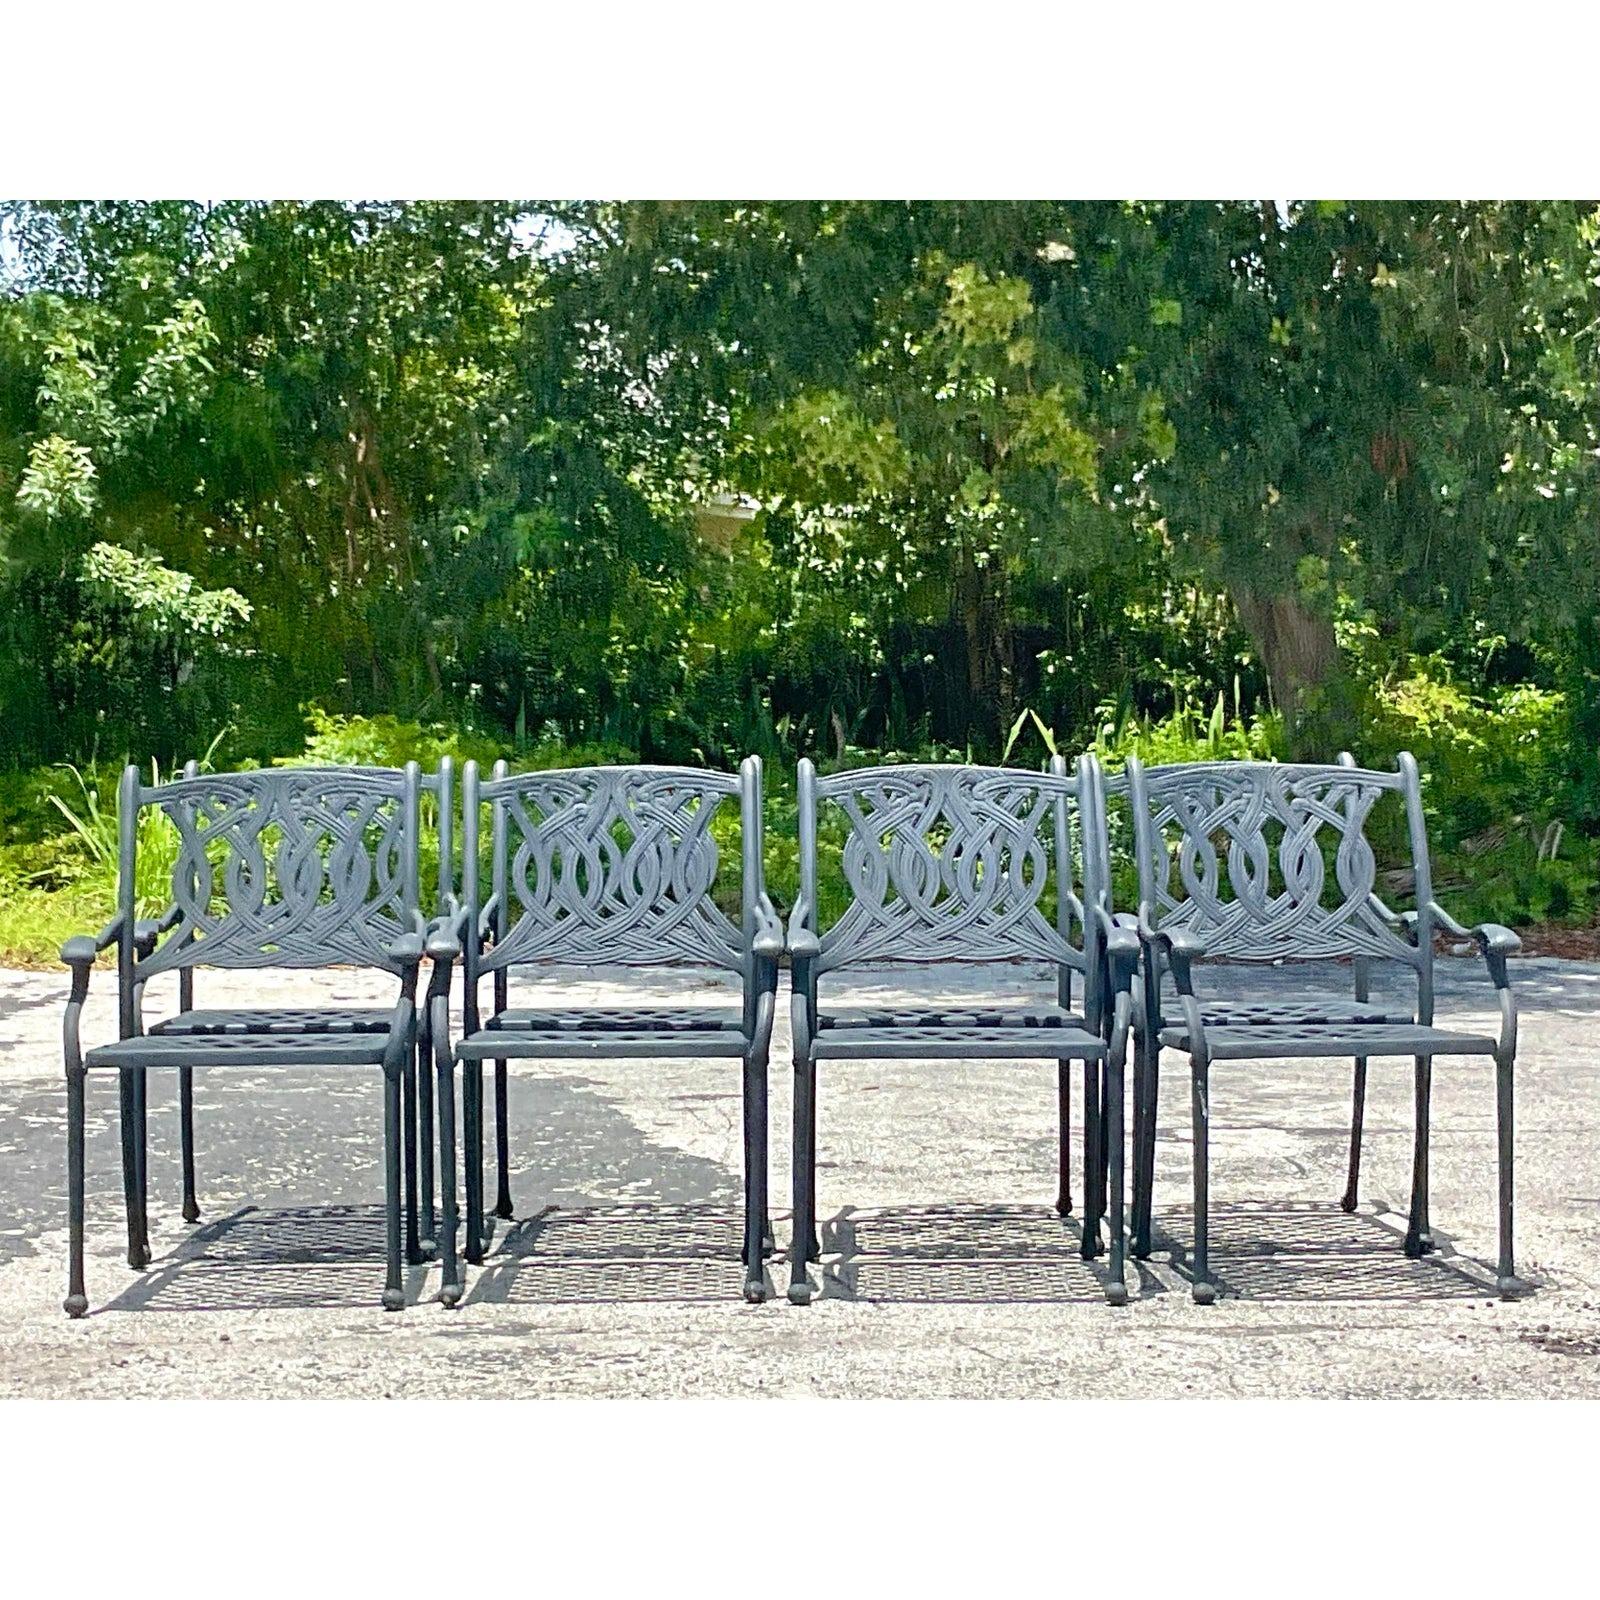 Vintage Coastal Scroll Outdoor Cast Aluminum Dining Chairs - Set of 8 In Good Condition For Sale In west palm beach, FL